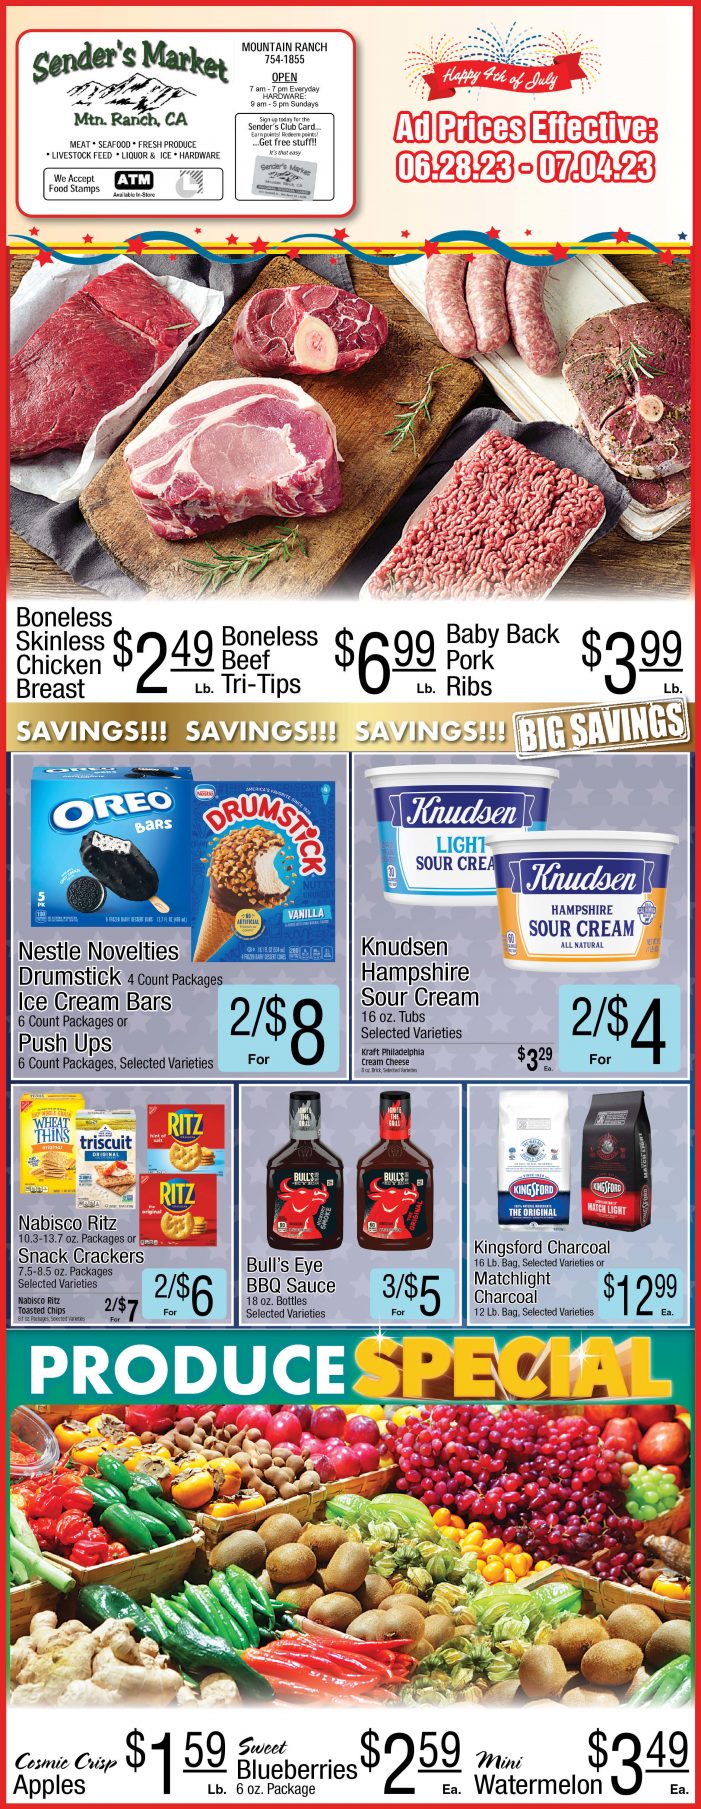 Sender’s Market Weekly Ad & Grocery Specials June 28 – July 4th! Shop Local & Save!!